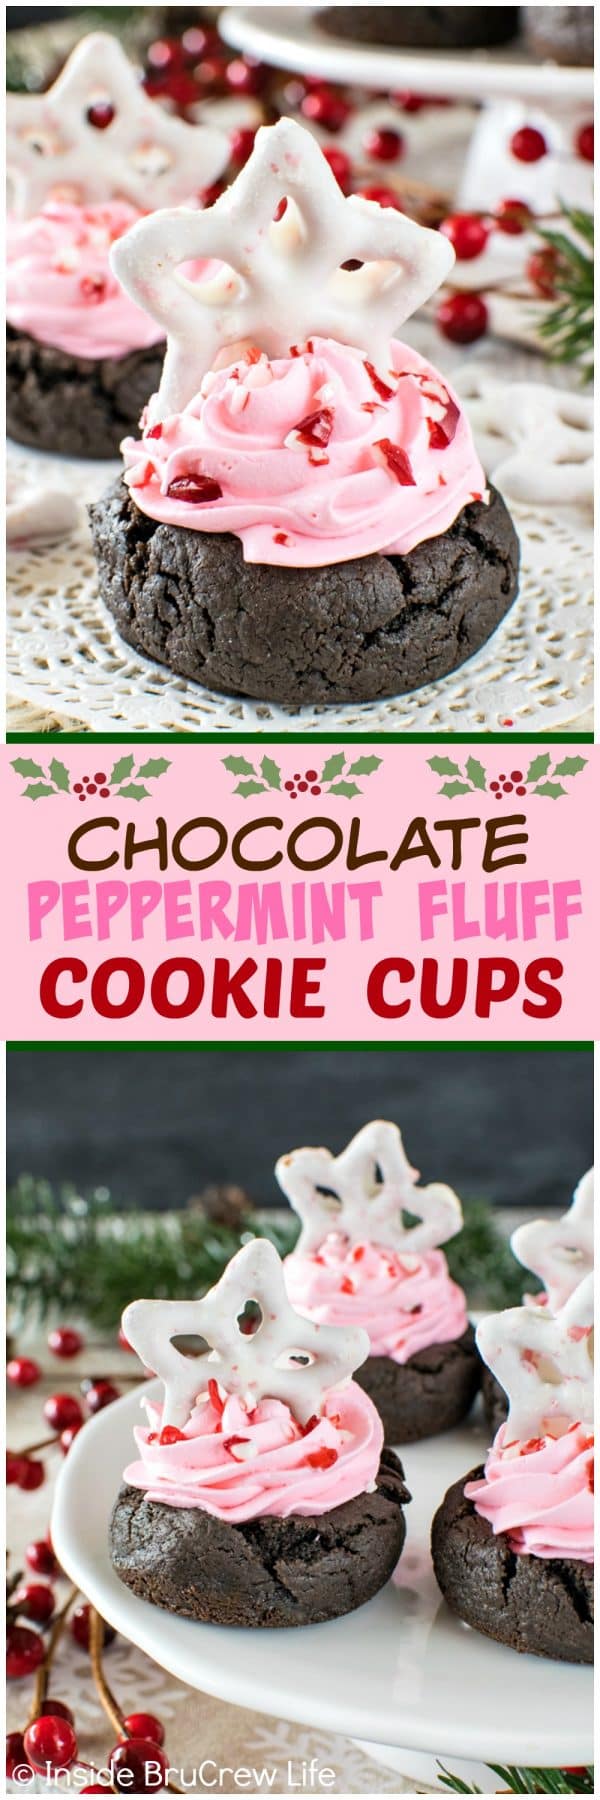 Chocolate Peppermint Fluff Cookie Cups - swirls of creamy pink filling and candy cane bits make these easy cookies a fun treat. Great dessert recipe for holiday parties!